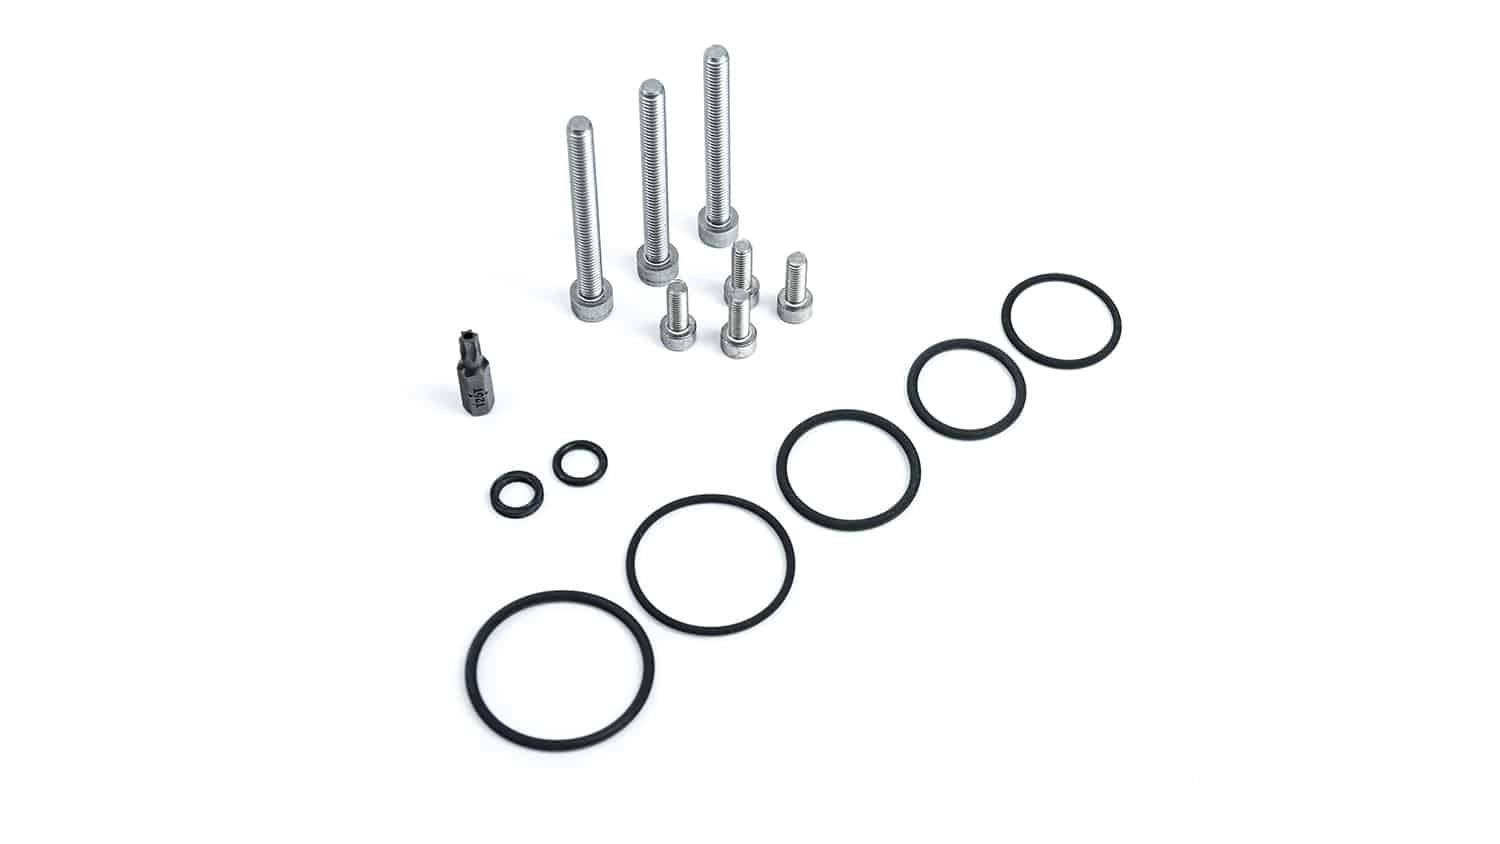 Speed3 and Speed6 complete high pressure fuel pump seal and filter kit